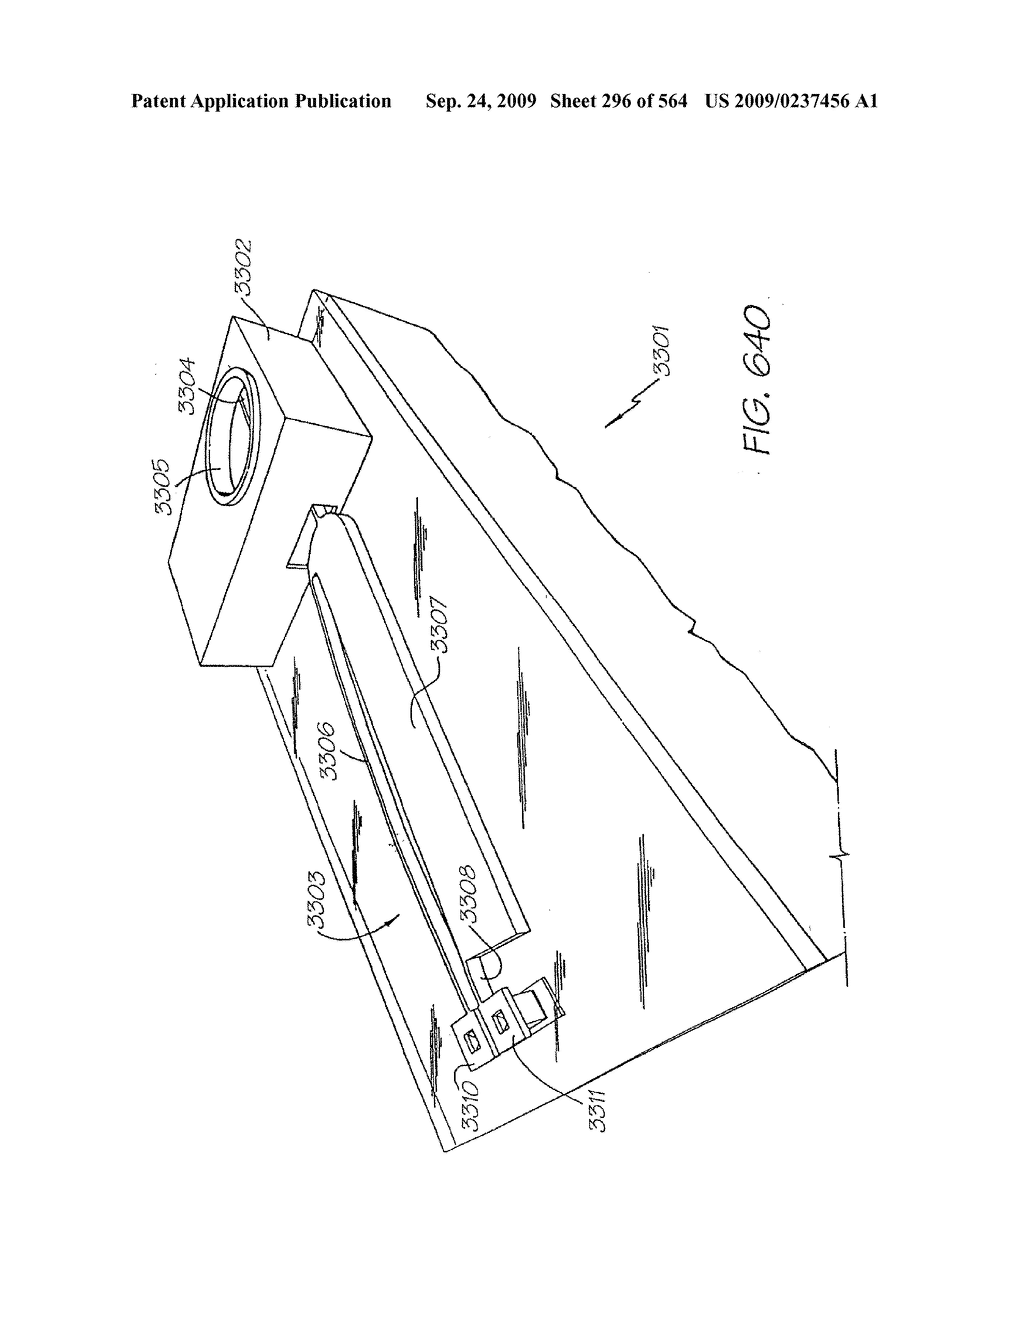 Inkjet Printhead With Paddle For Ejecting Ink From One Of Two Nozzles - diagram, schematic, and image 297